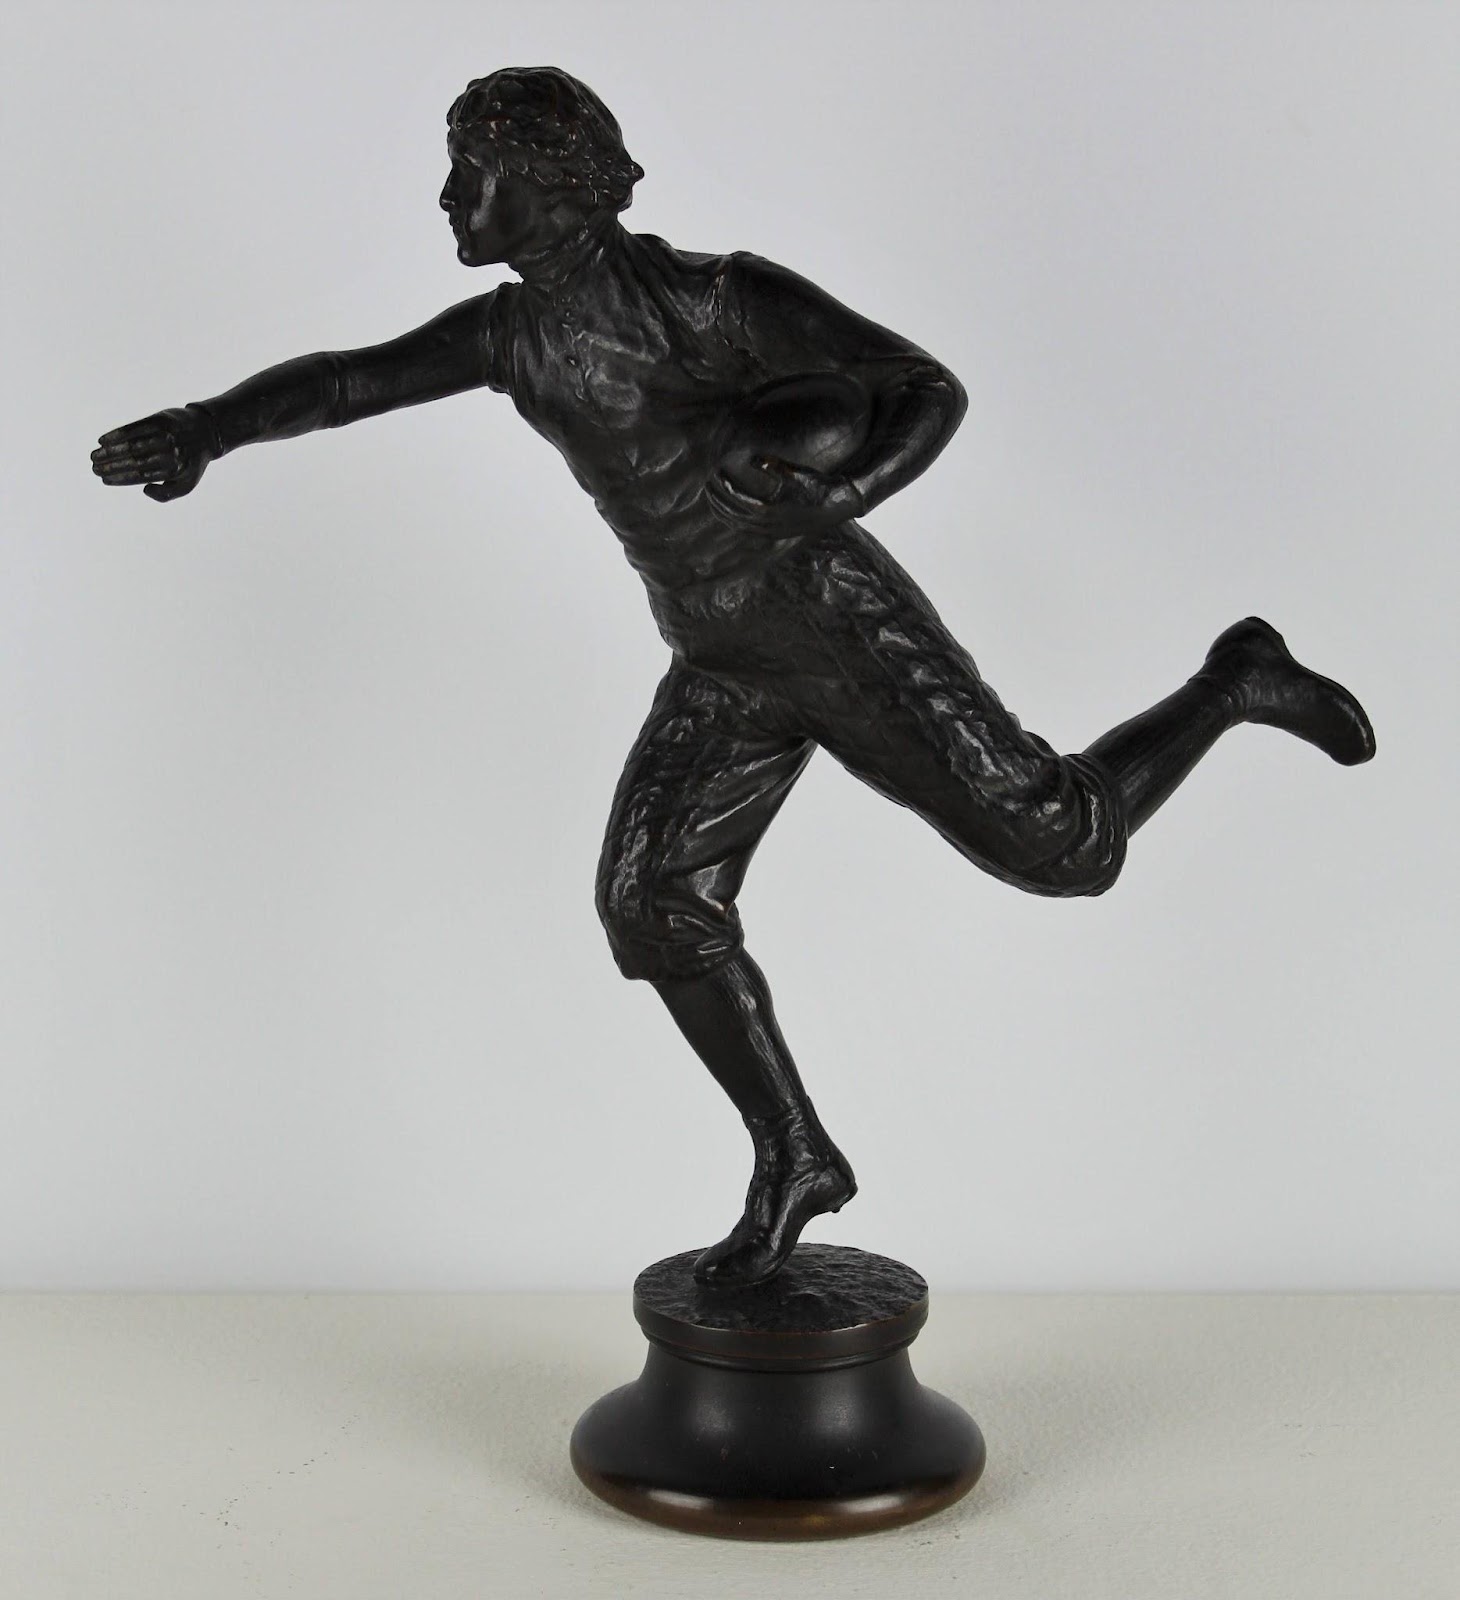 A bronze sculpture of a football player, one arm cradling the football to his chest while the other is extended to push away an invisible opponent. He stands balanced on on the toe, his other leg extended behind him in a run.